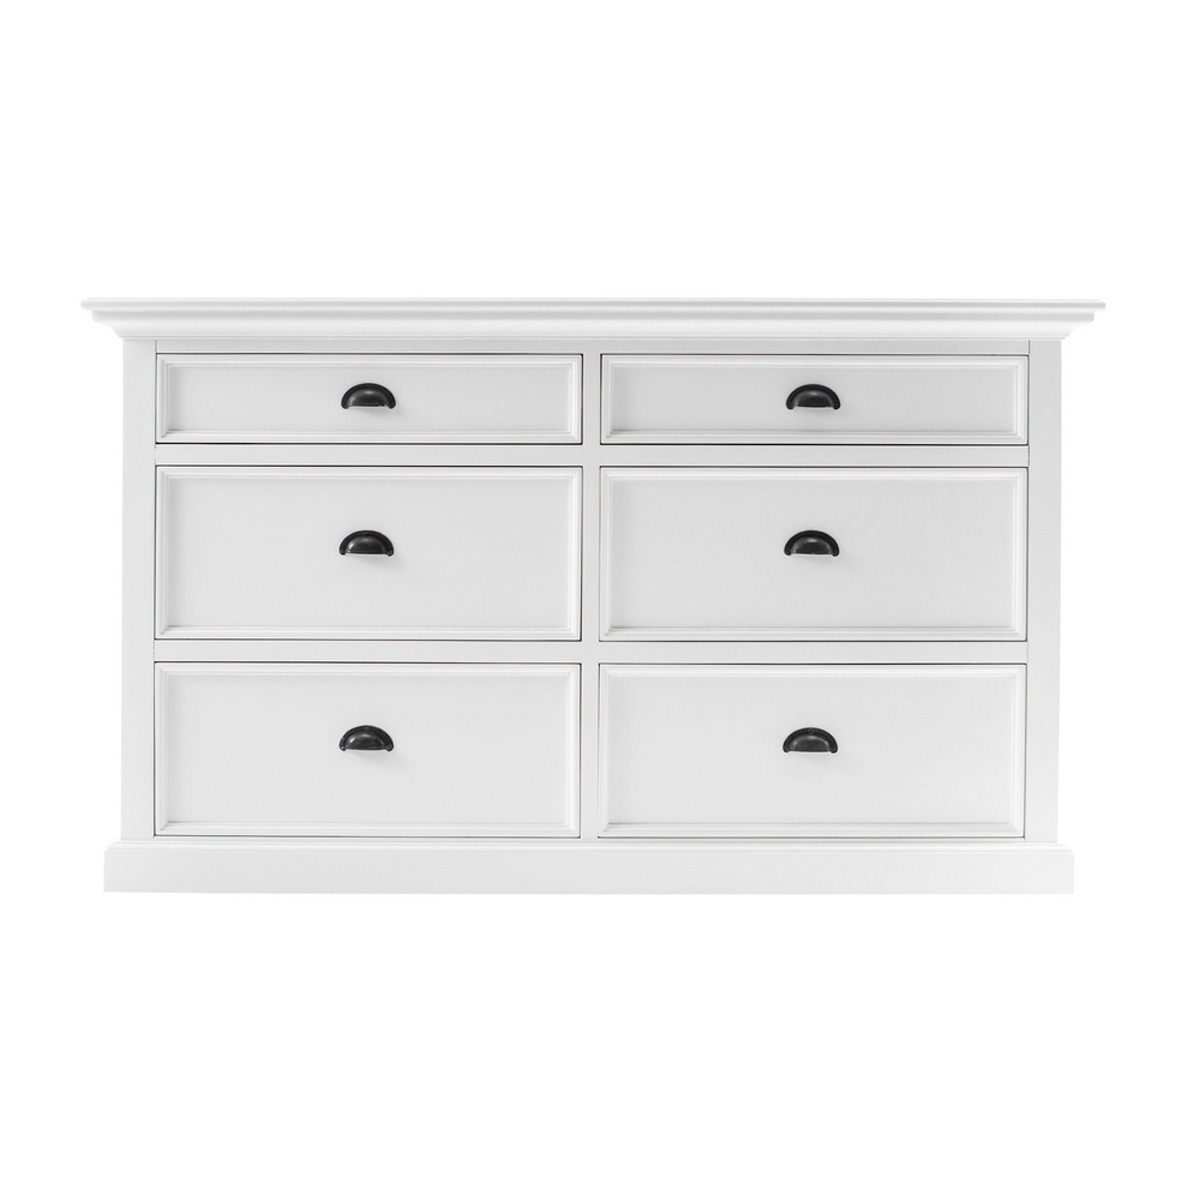 Halifax Dresser with 6 Drawers in White